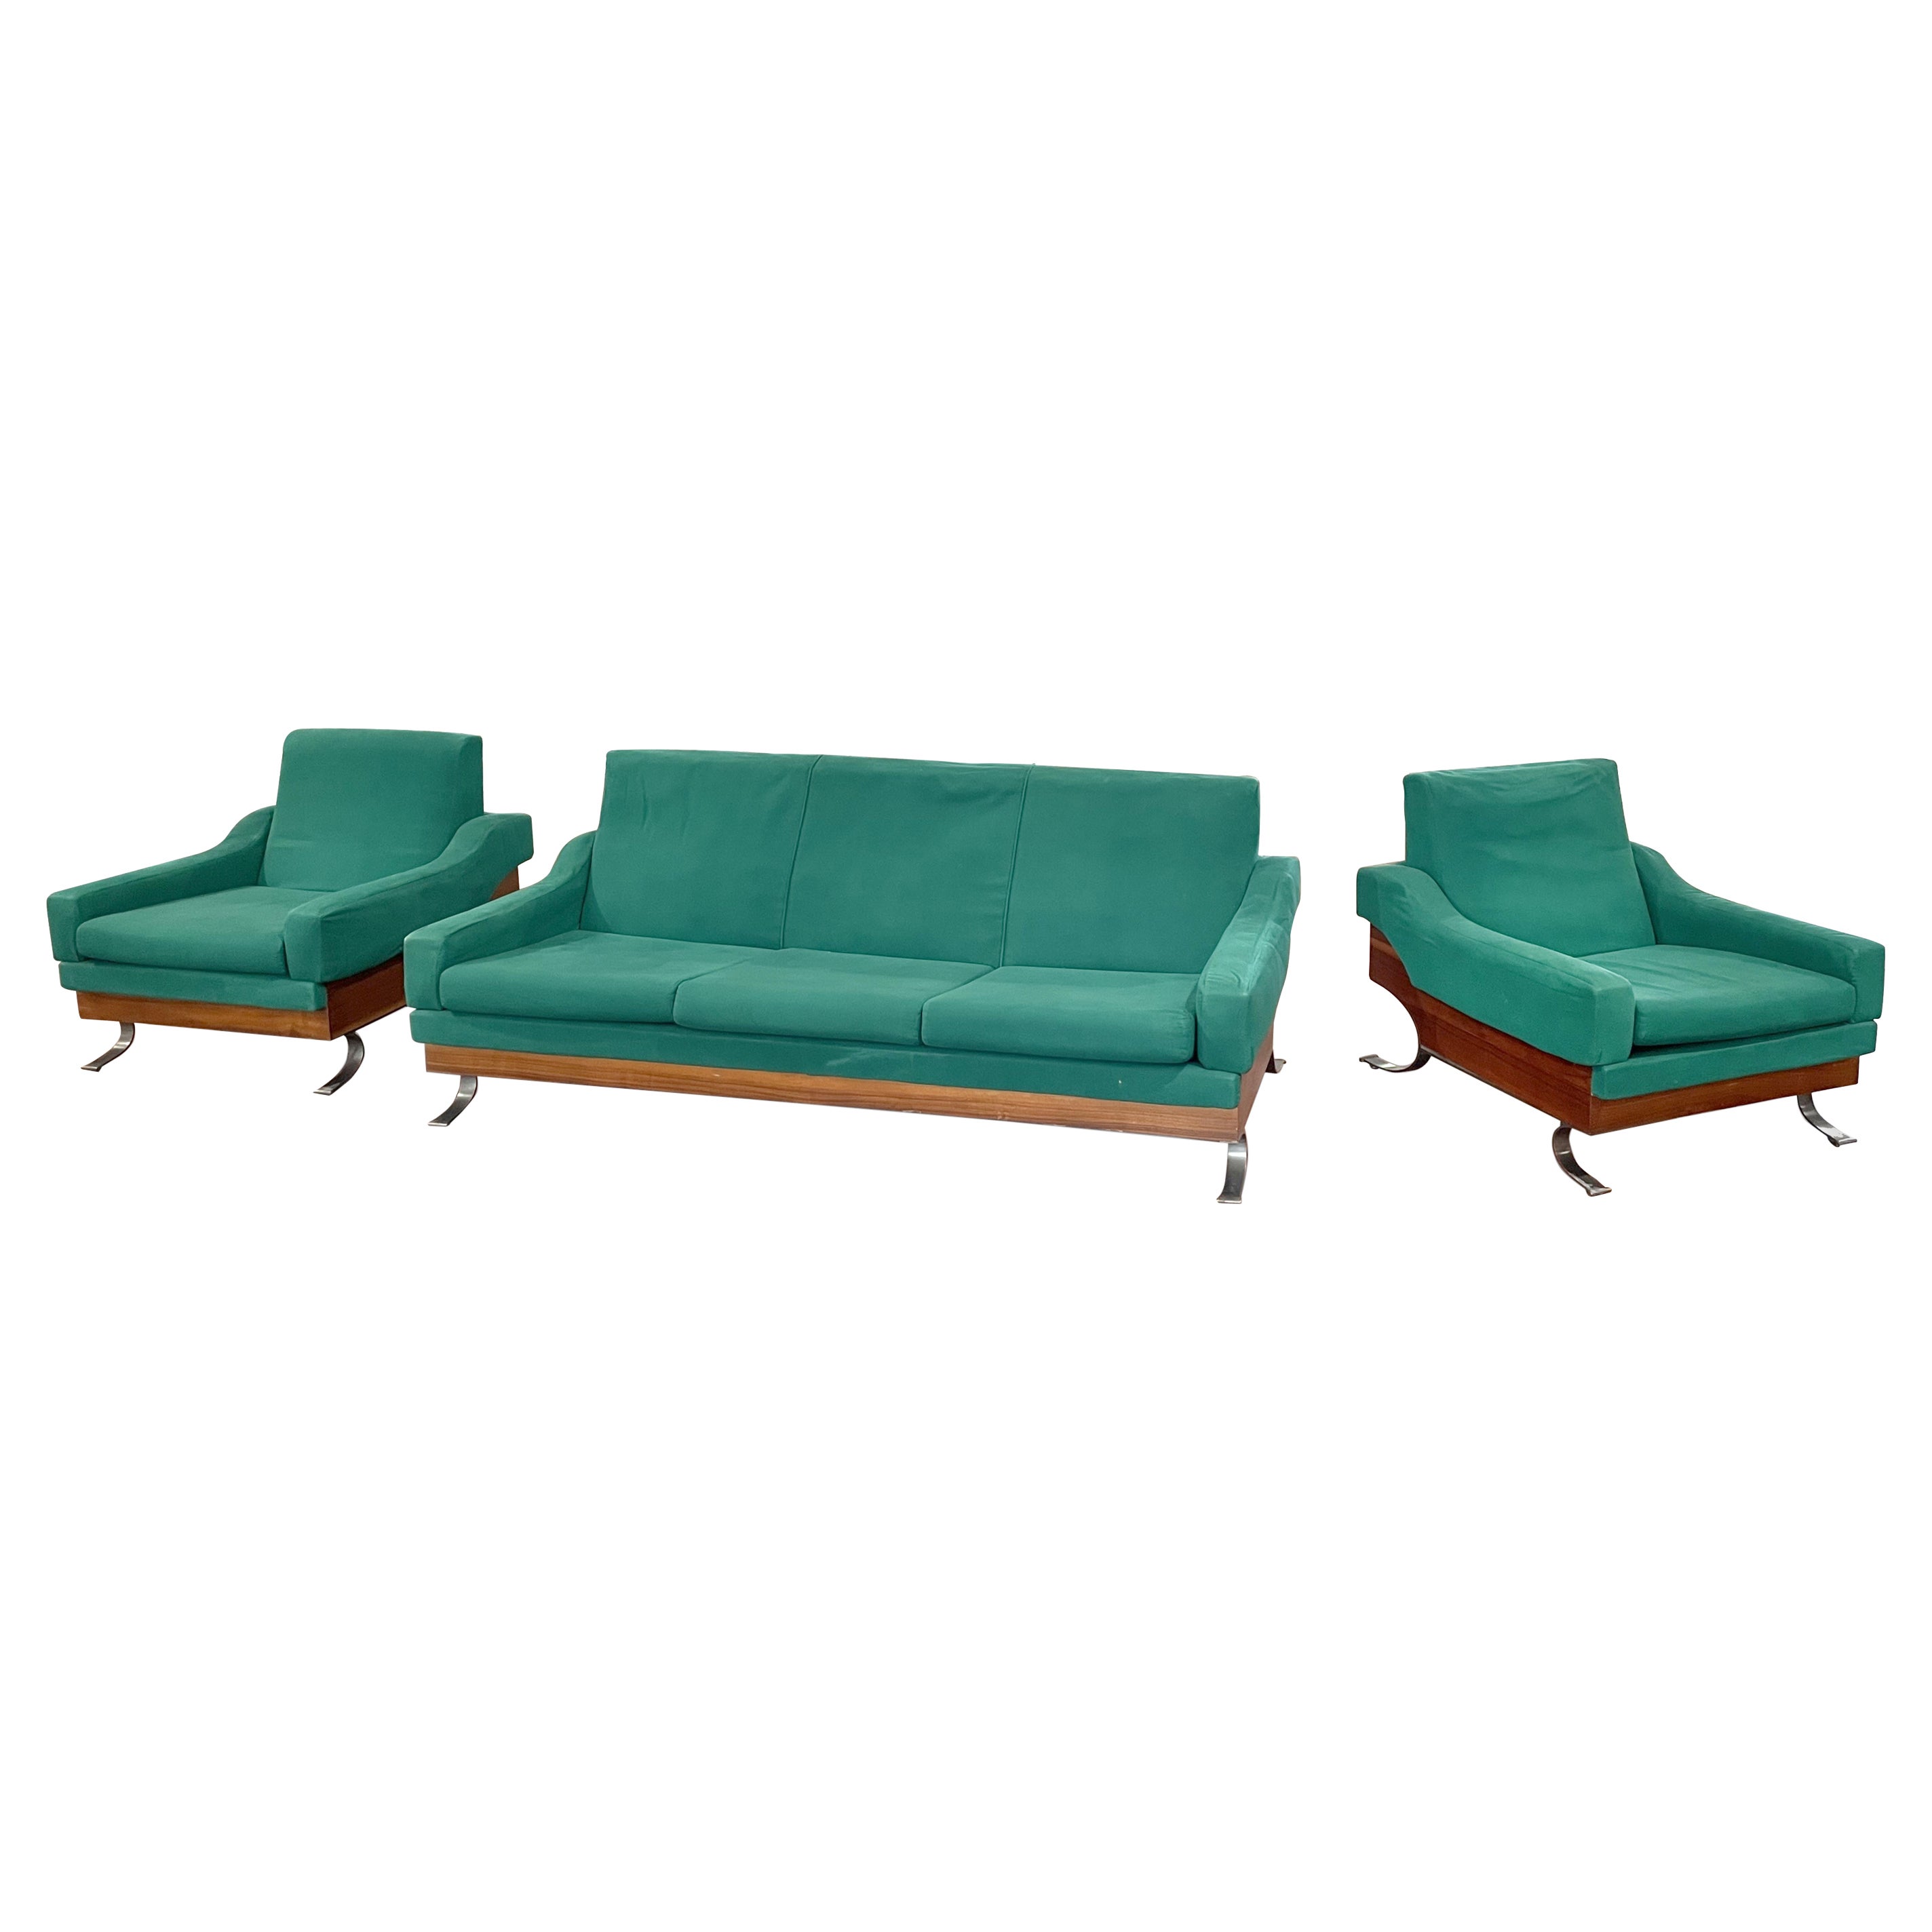 Vintage Sofa Set by Saporiti, Italy 1950s. Original upholster, very rare to find in the set armchairs + sofa.

Armchairs 70 x 84 x 94 cm each; Sofa 180x84x94 cm.

Very good condition. 